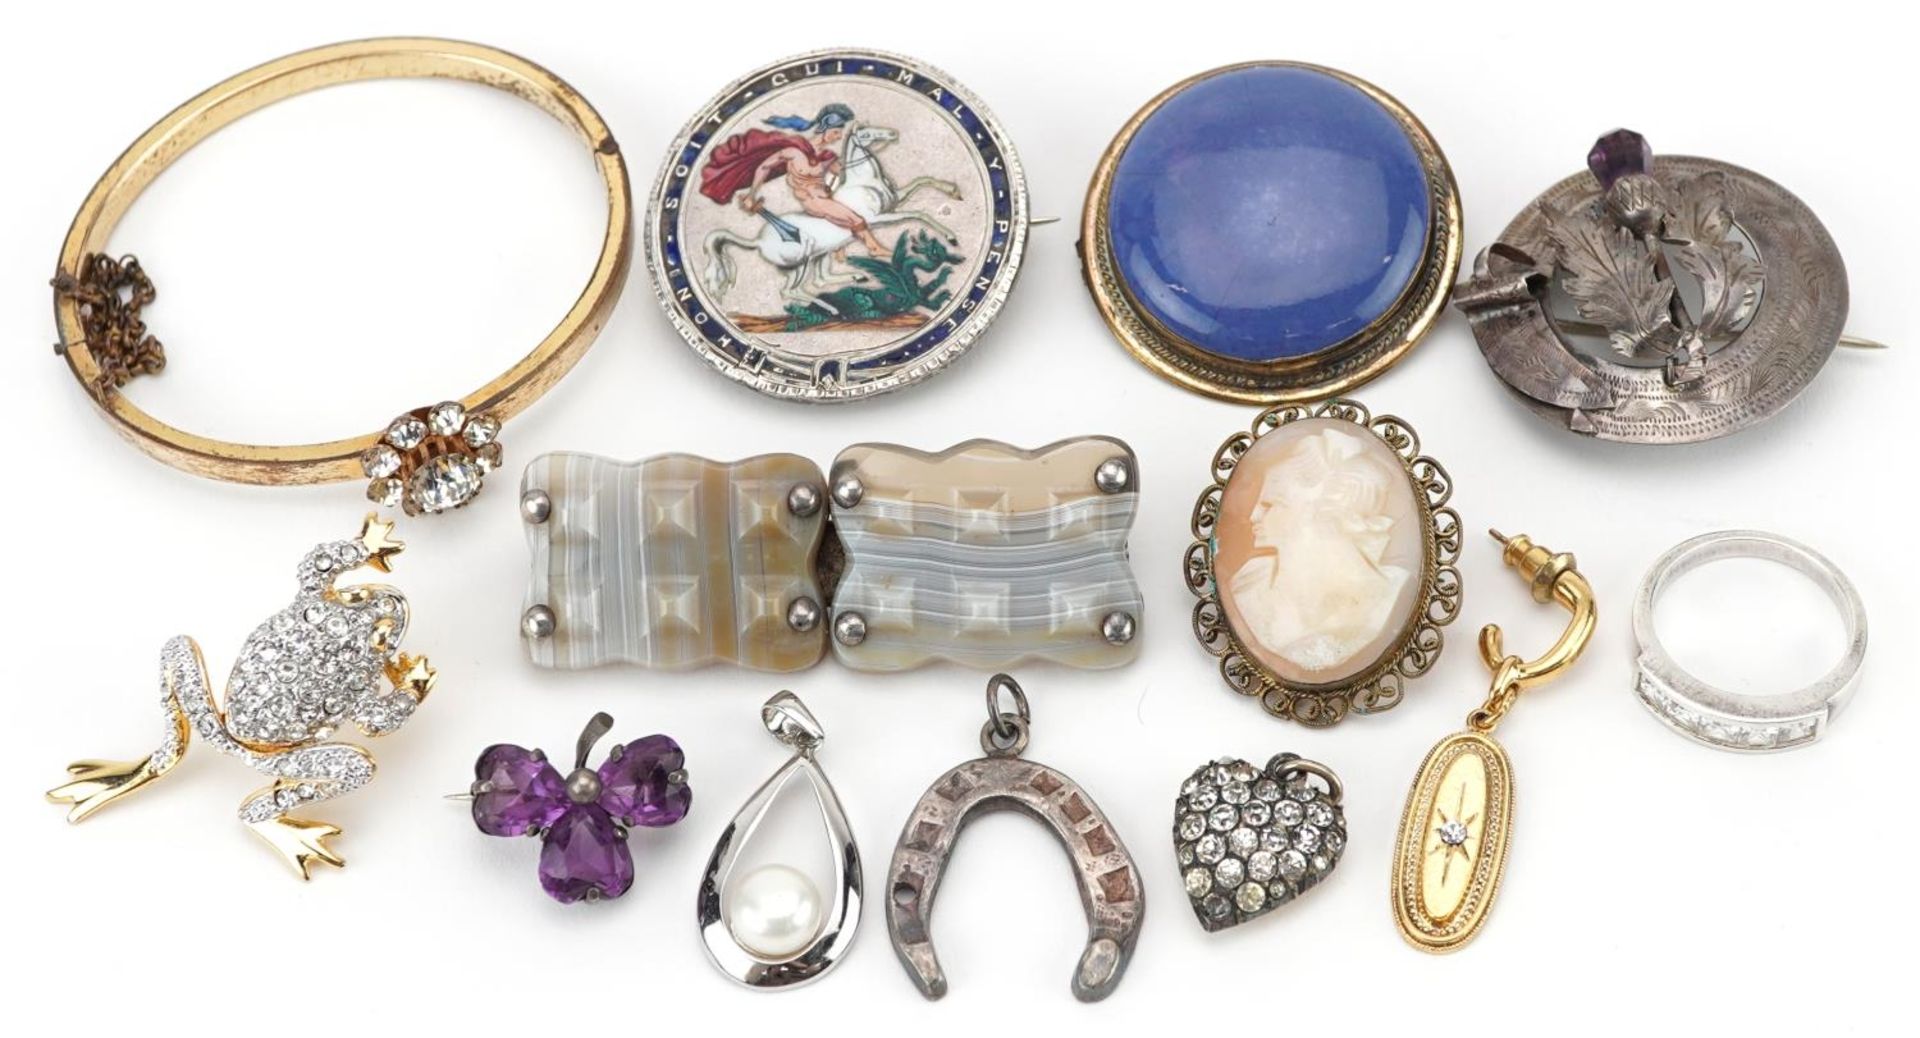 Antique and later jewellery including a George III 1819 enamelled crown brooch, cabochon Arts &